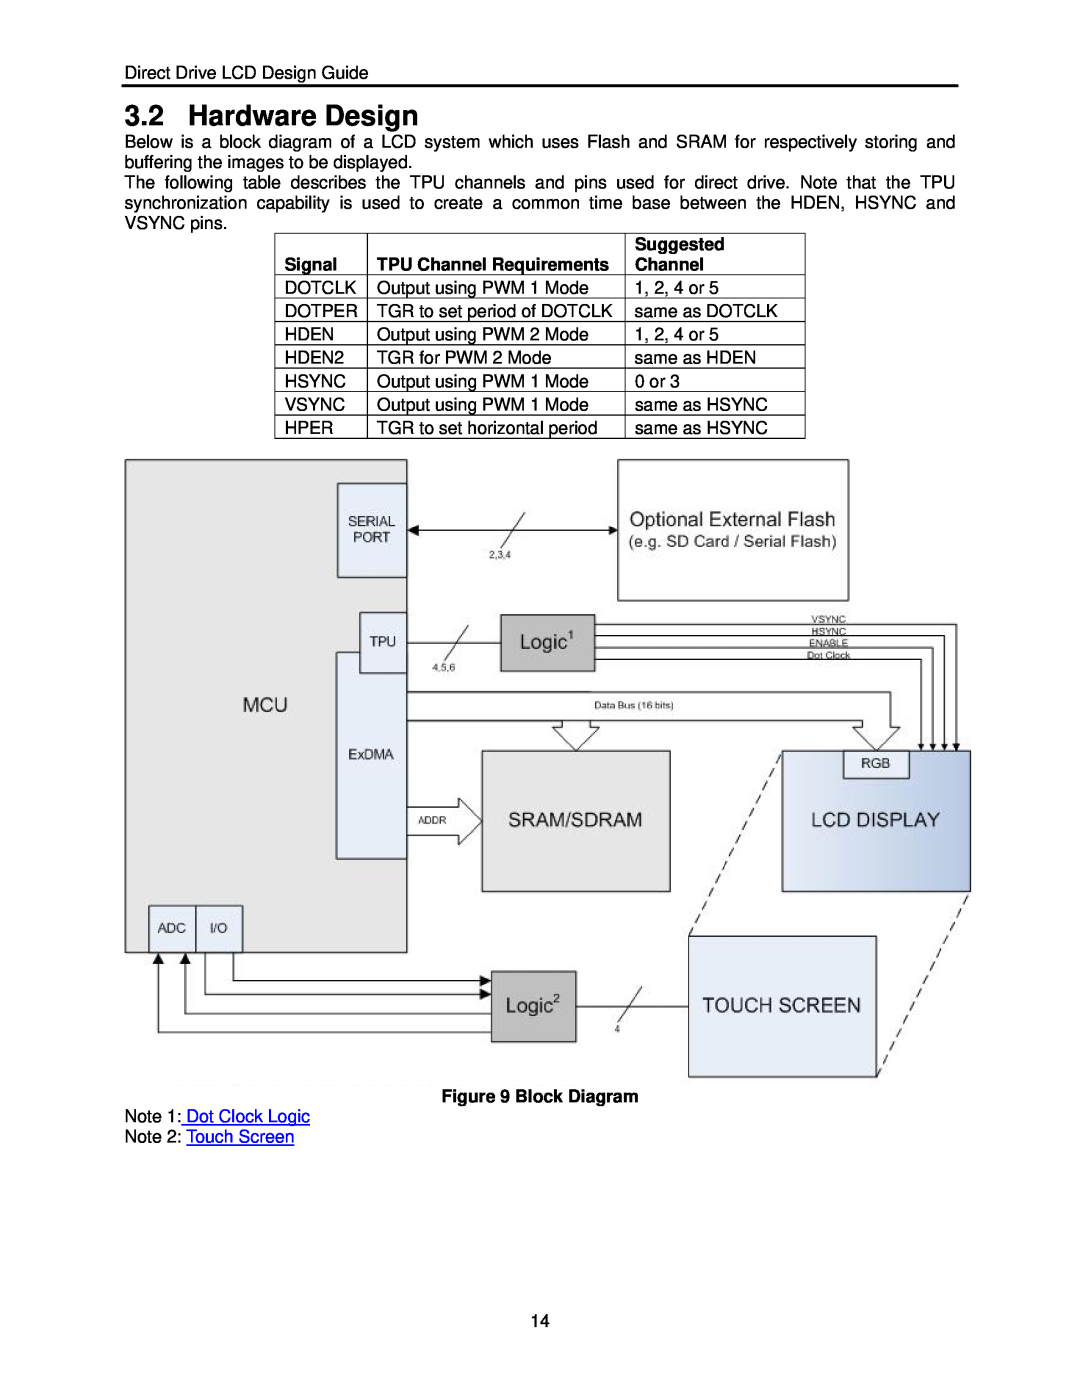 Renesas H8SX user manual Hardware Design, Signal, TPU Channel Requirements, Suggested, Block Diagram 